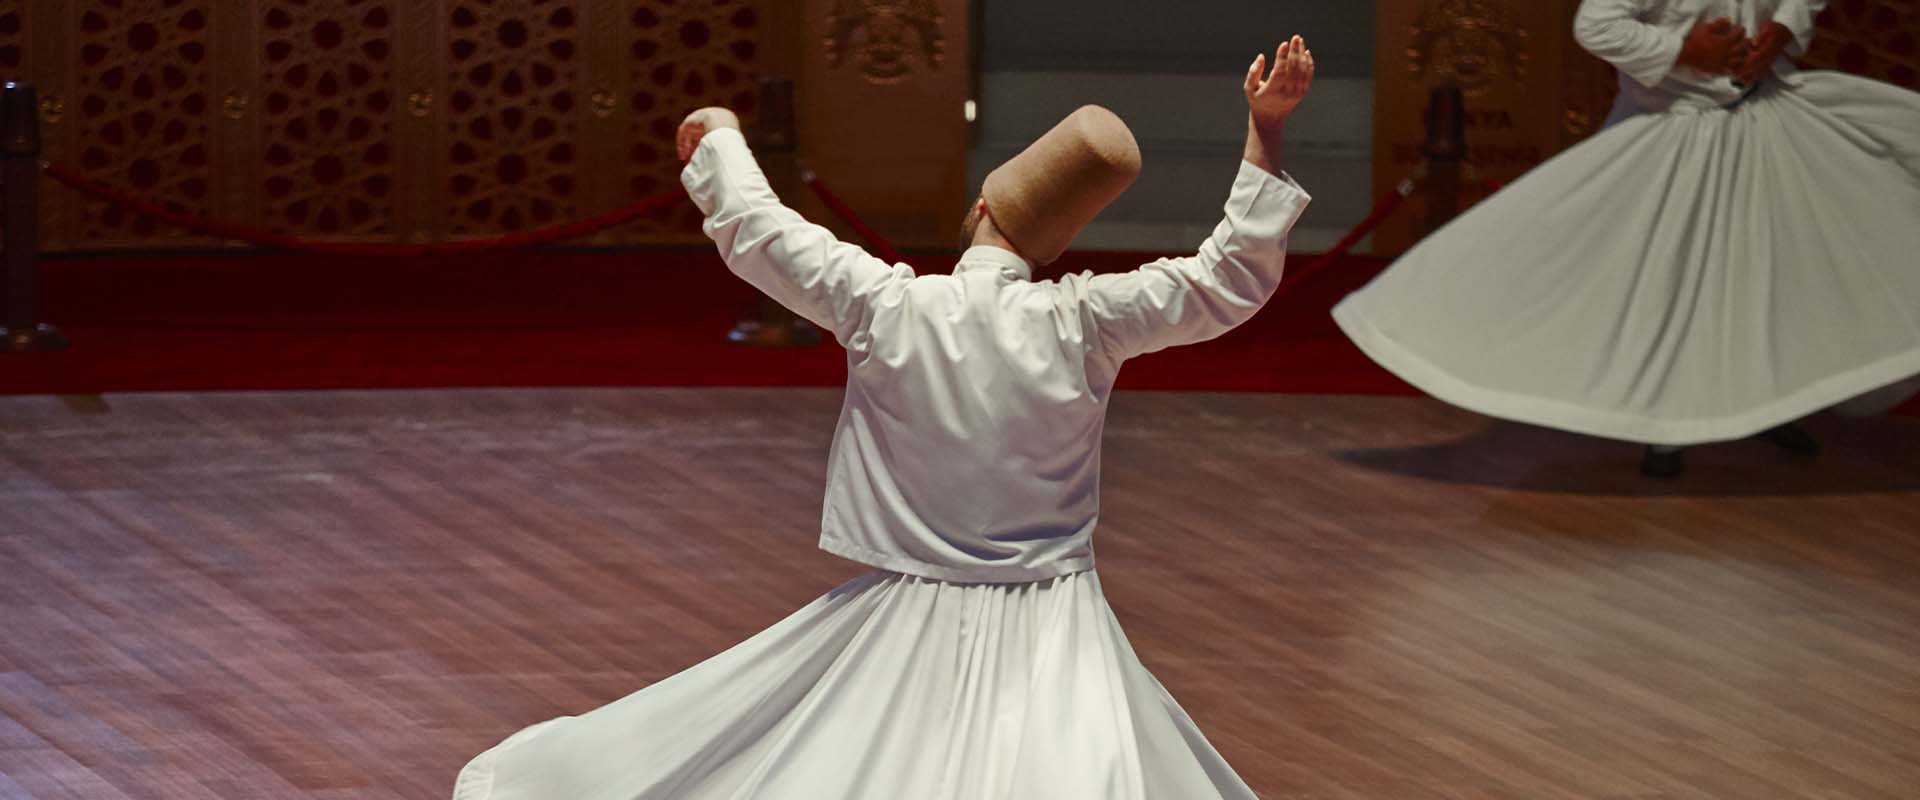 Whirling Dervishes Live Show